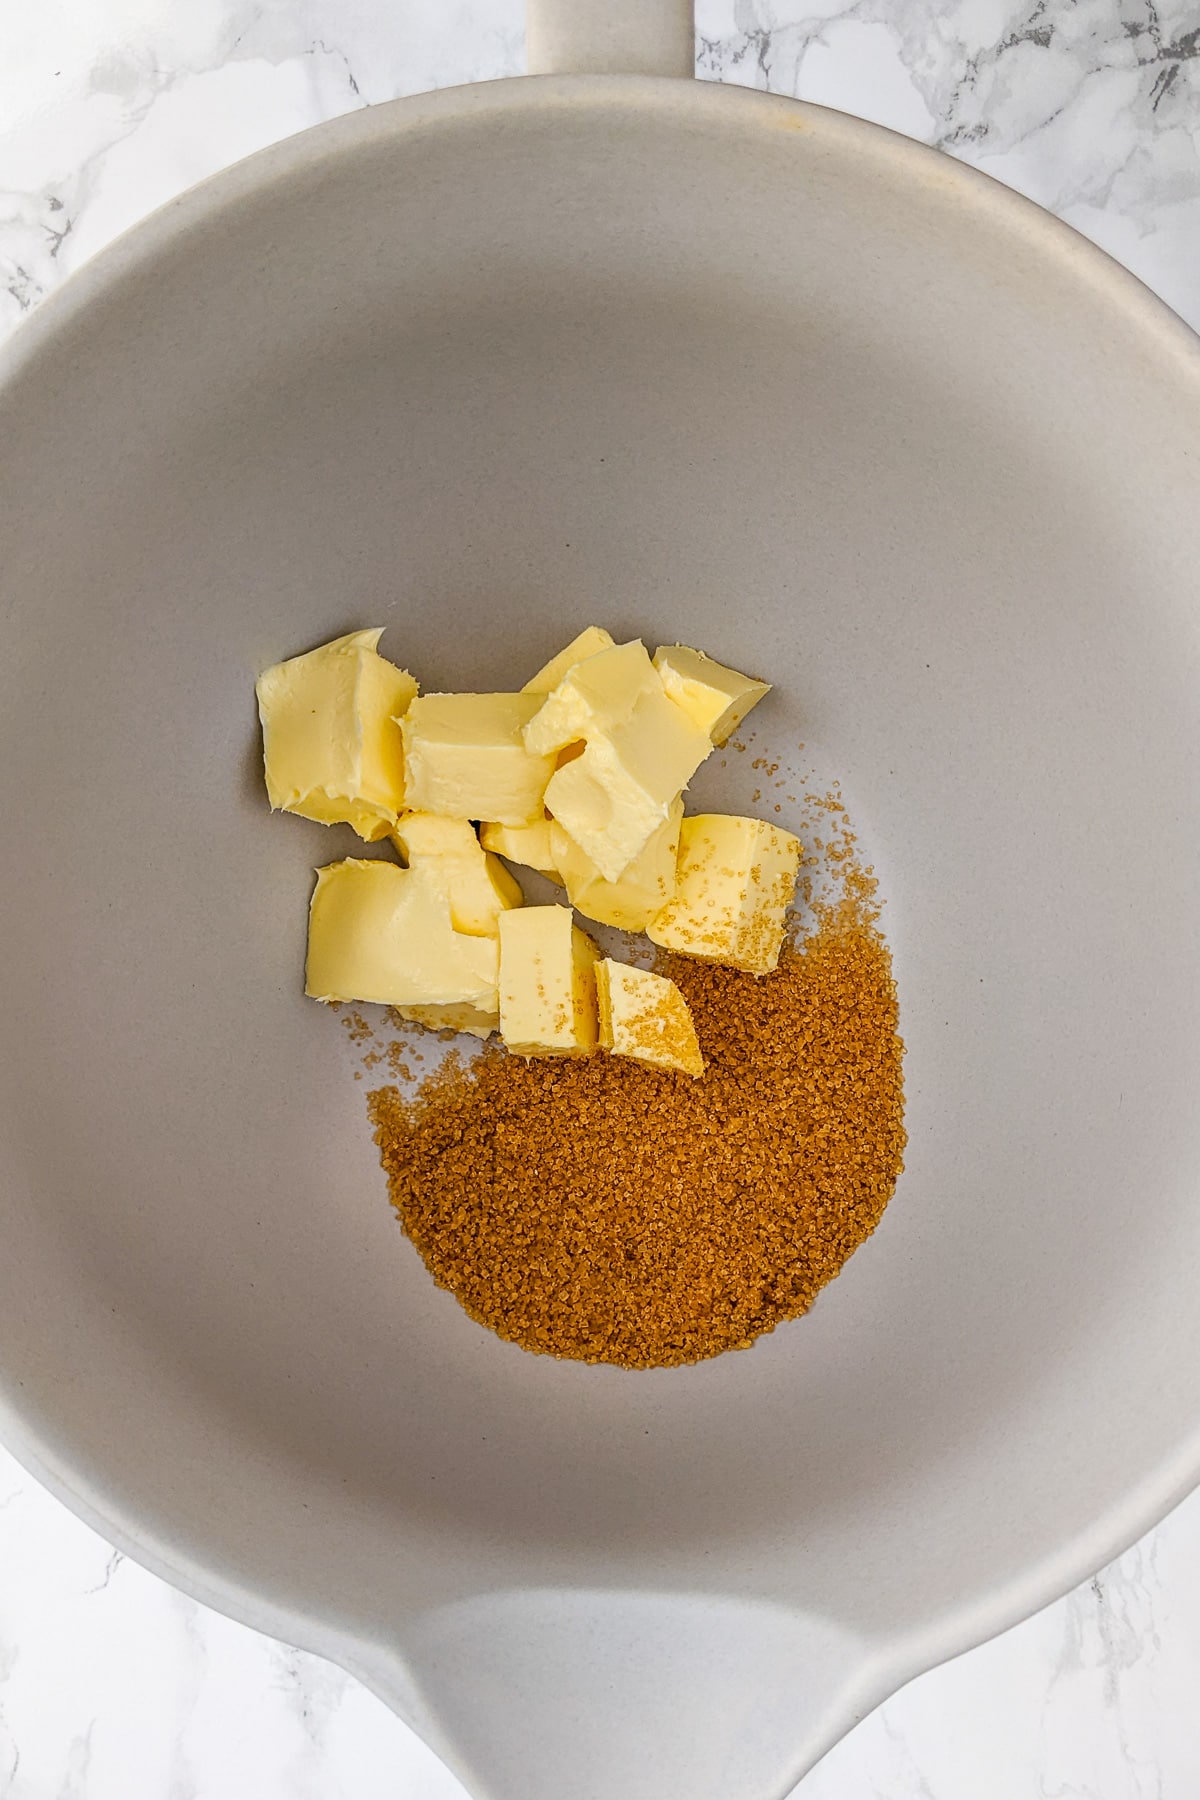 Butter mixing with demerara sugar in a large bowl.